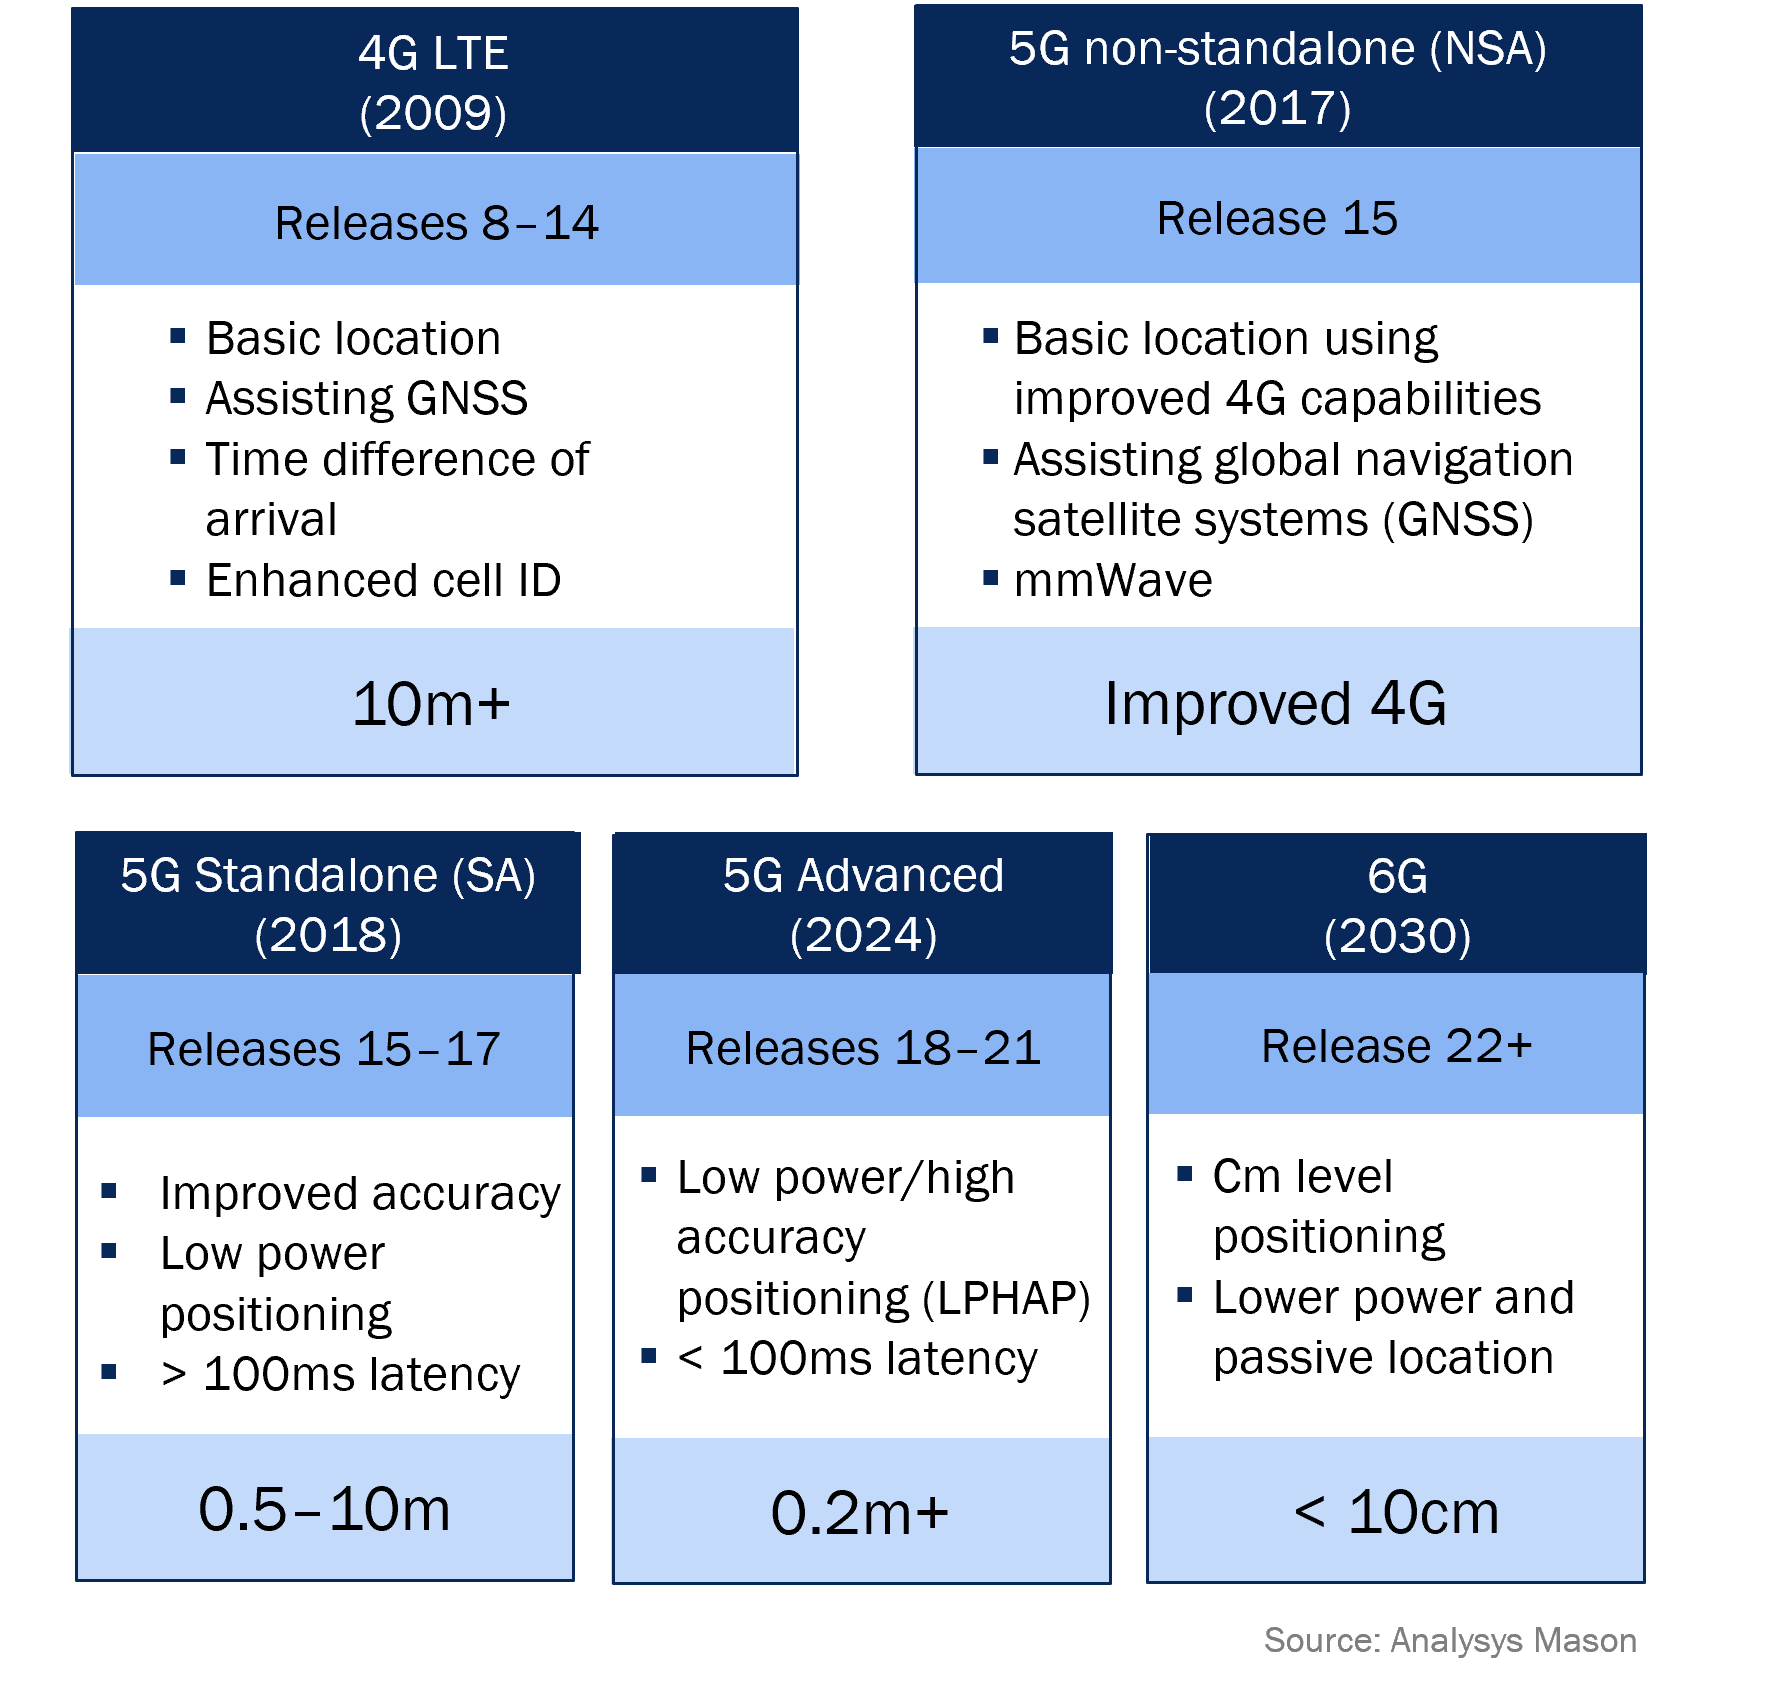 Figure 1: Cellular positioning capabilities, by 3GPP release stage